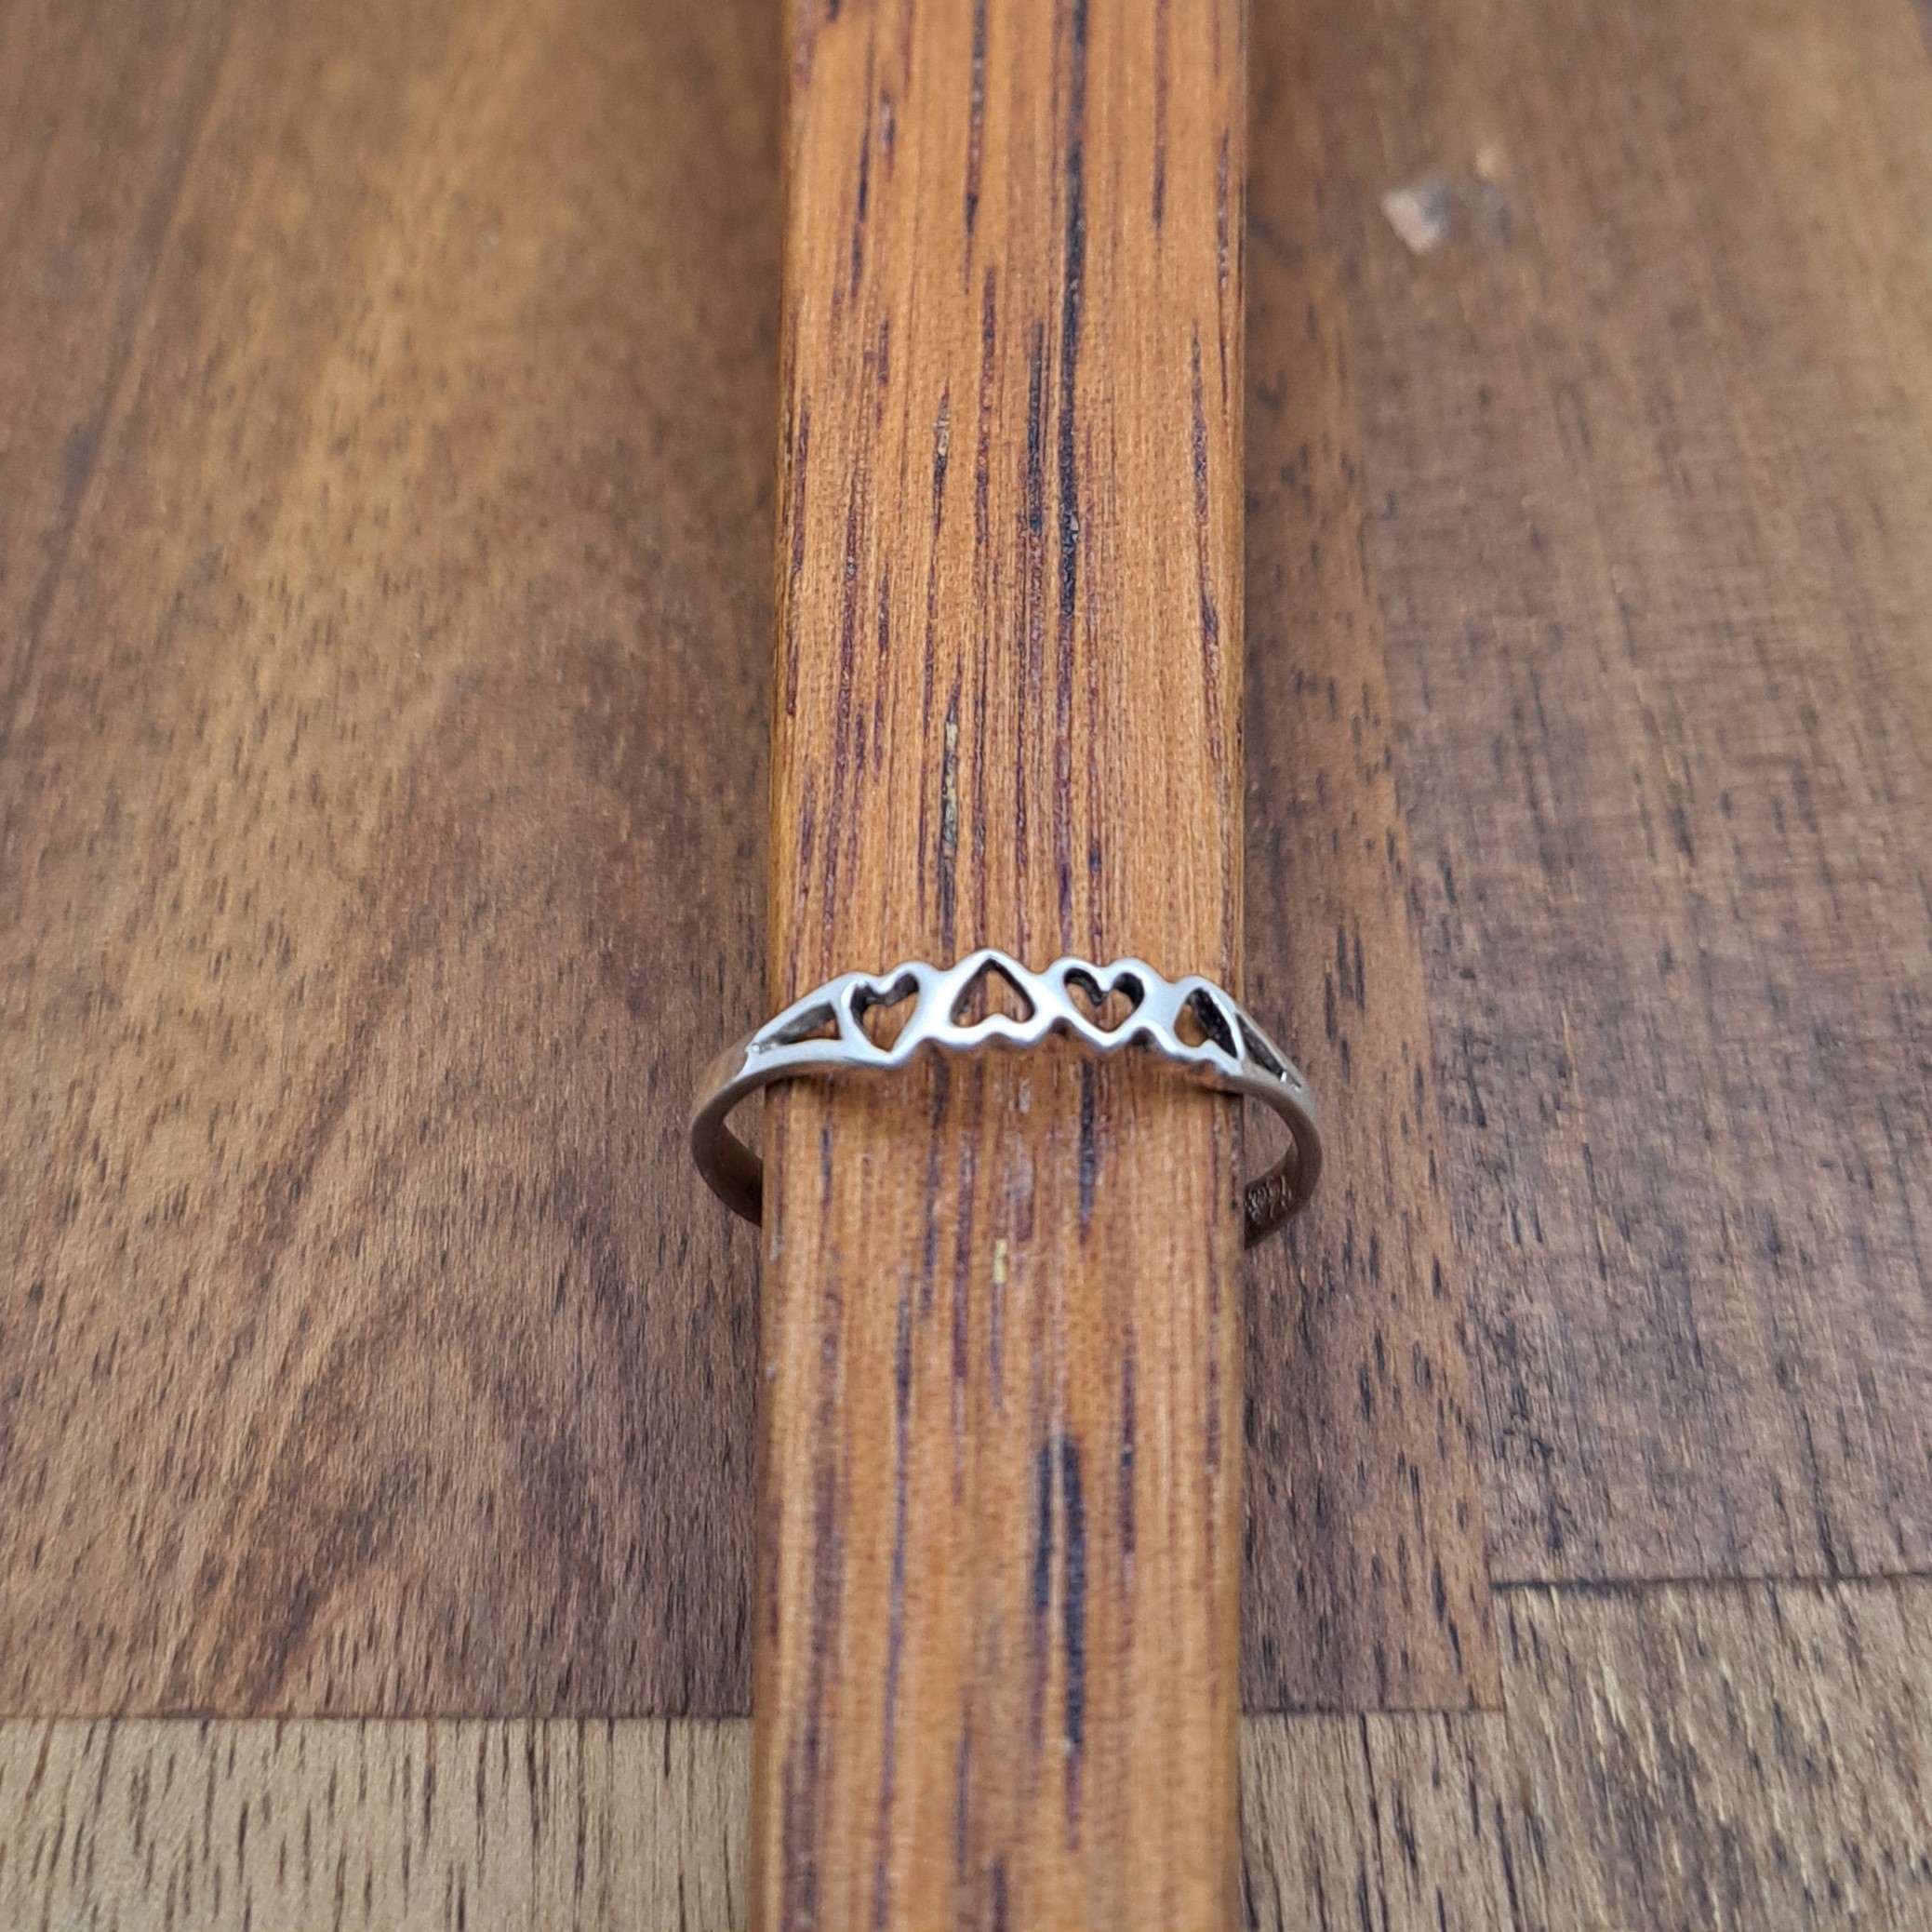 Freehand Heart Ring